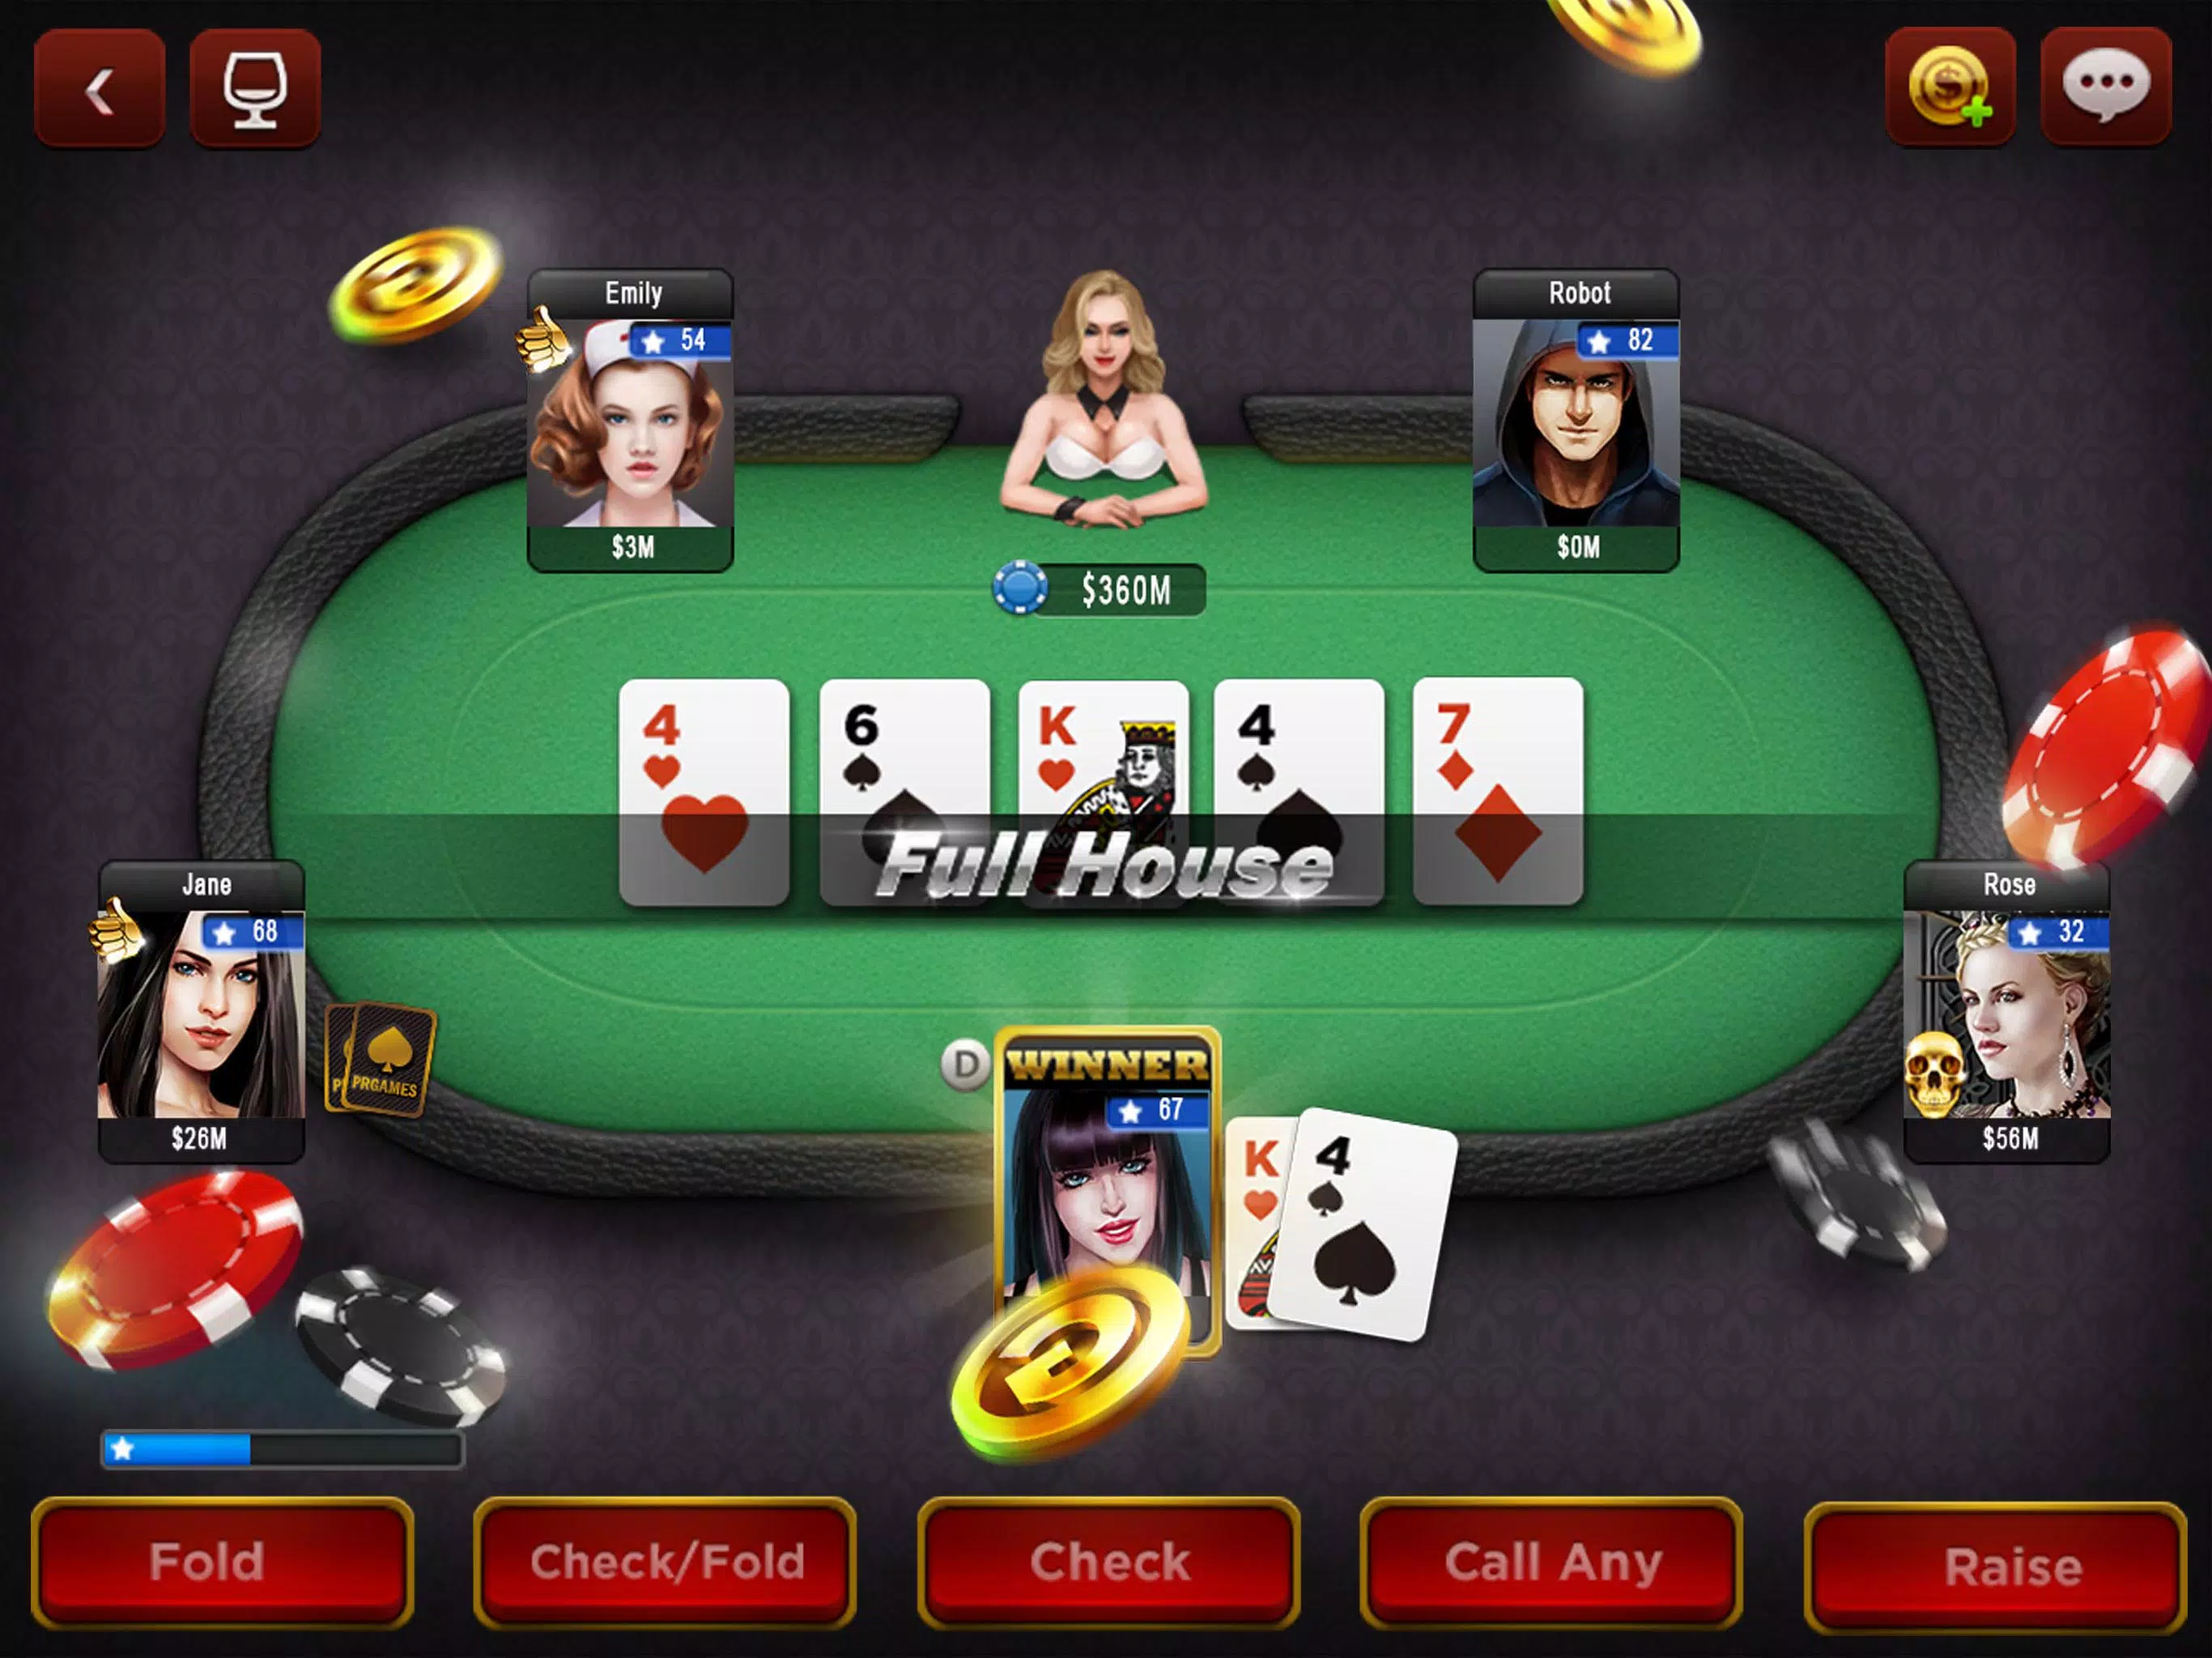 Spark Poker - Live Texas Holdem Casino for Android - APK Download